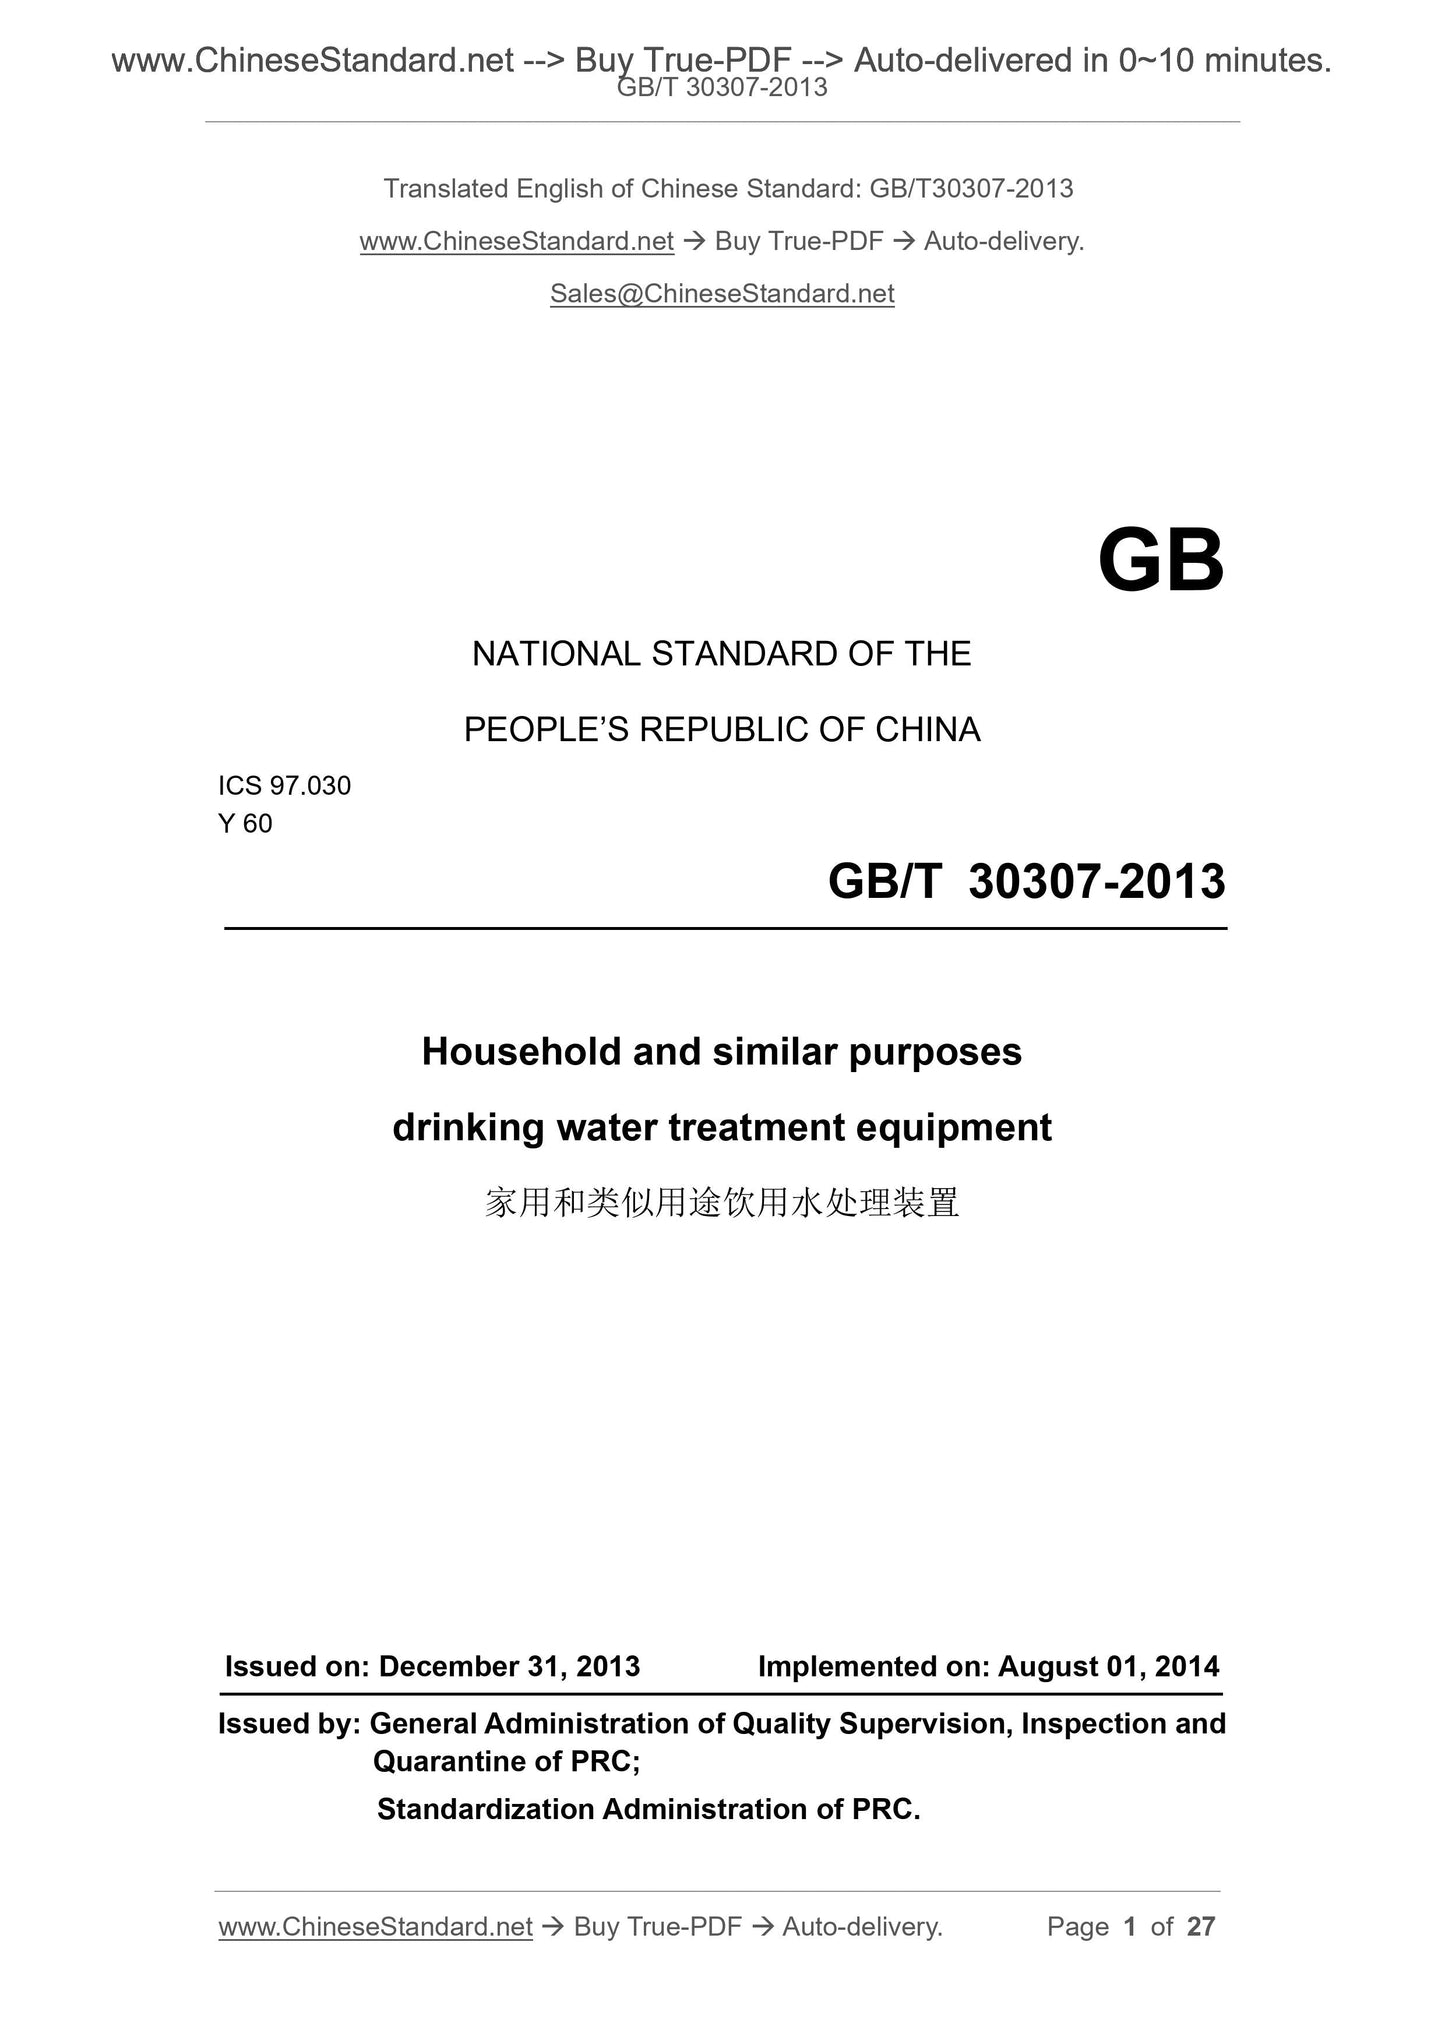 GB/T 30307-2013 Page 1